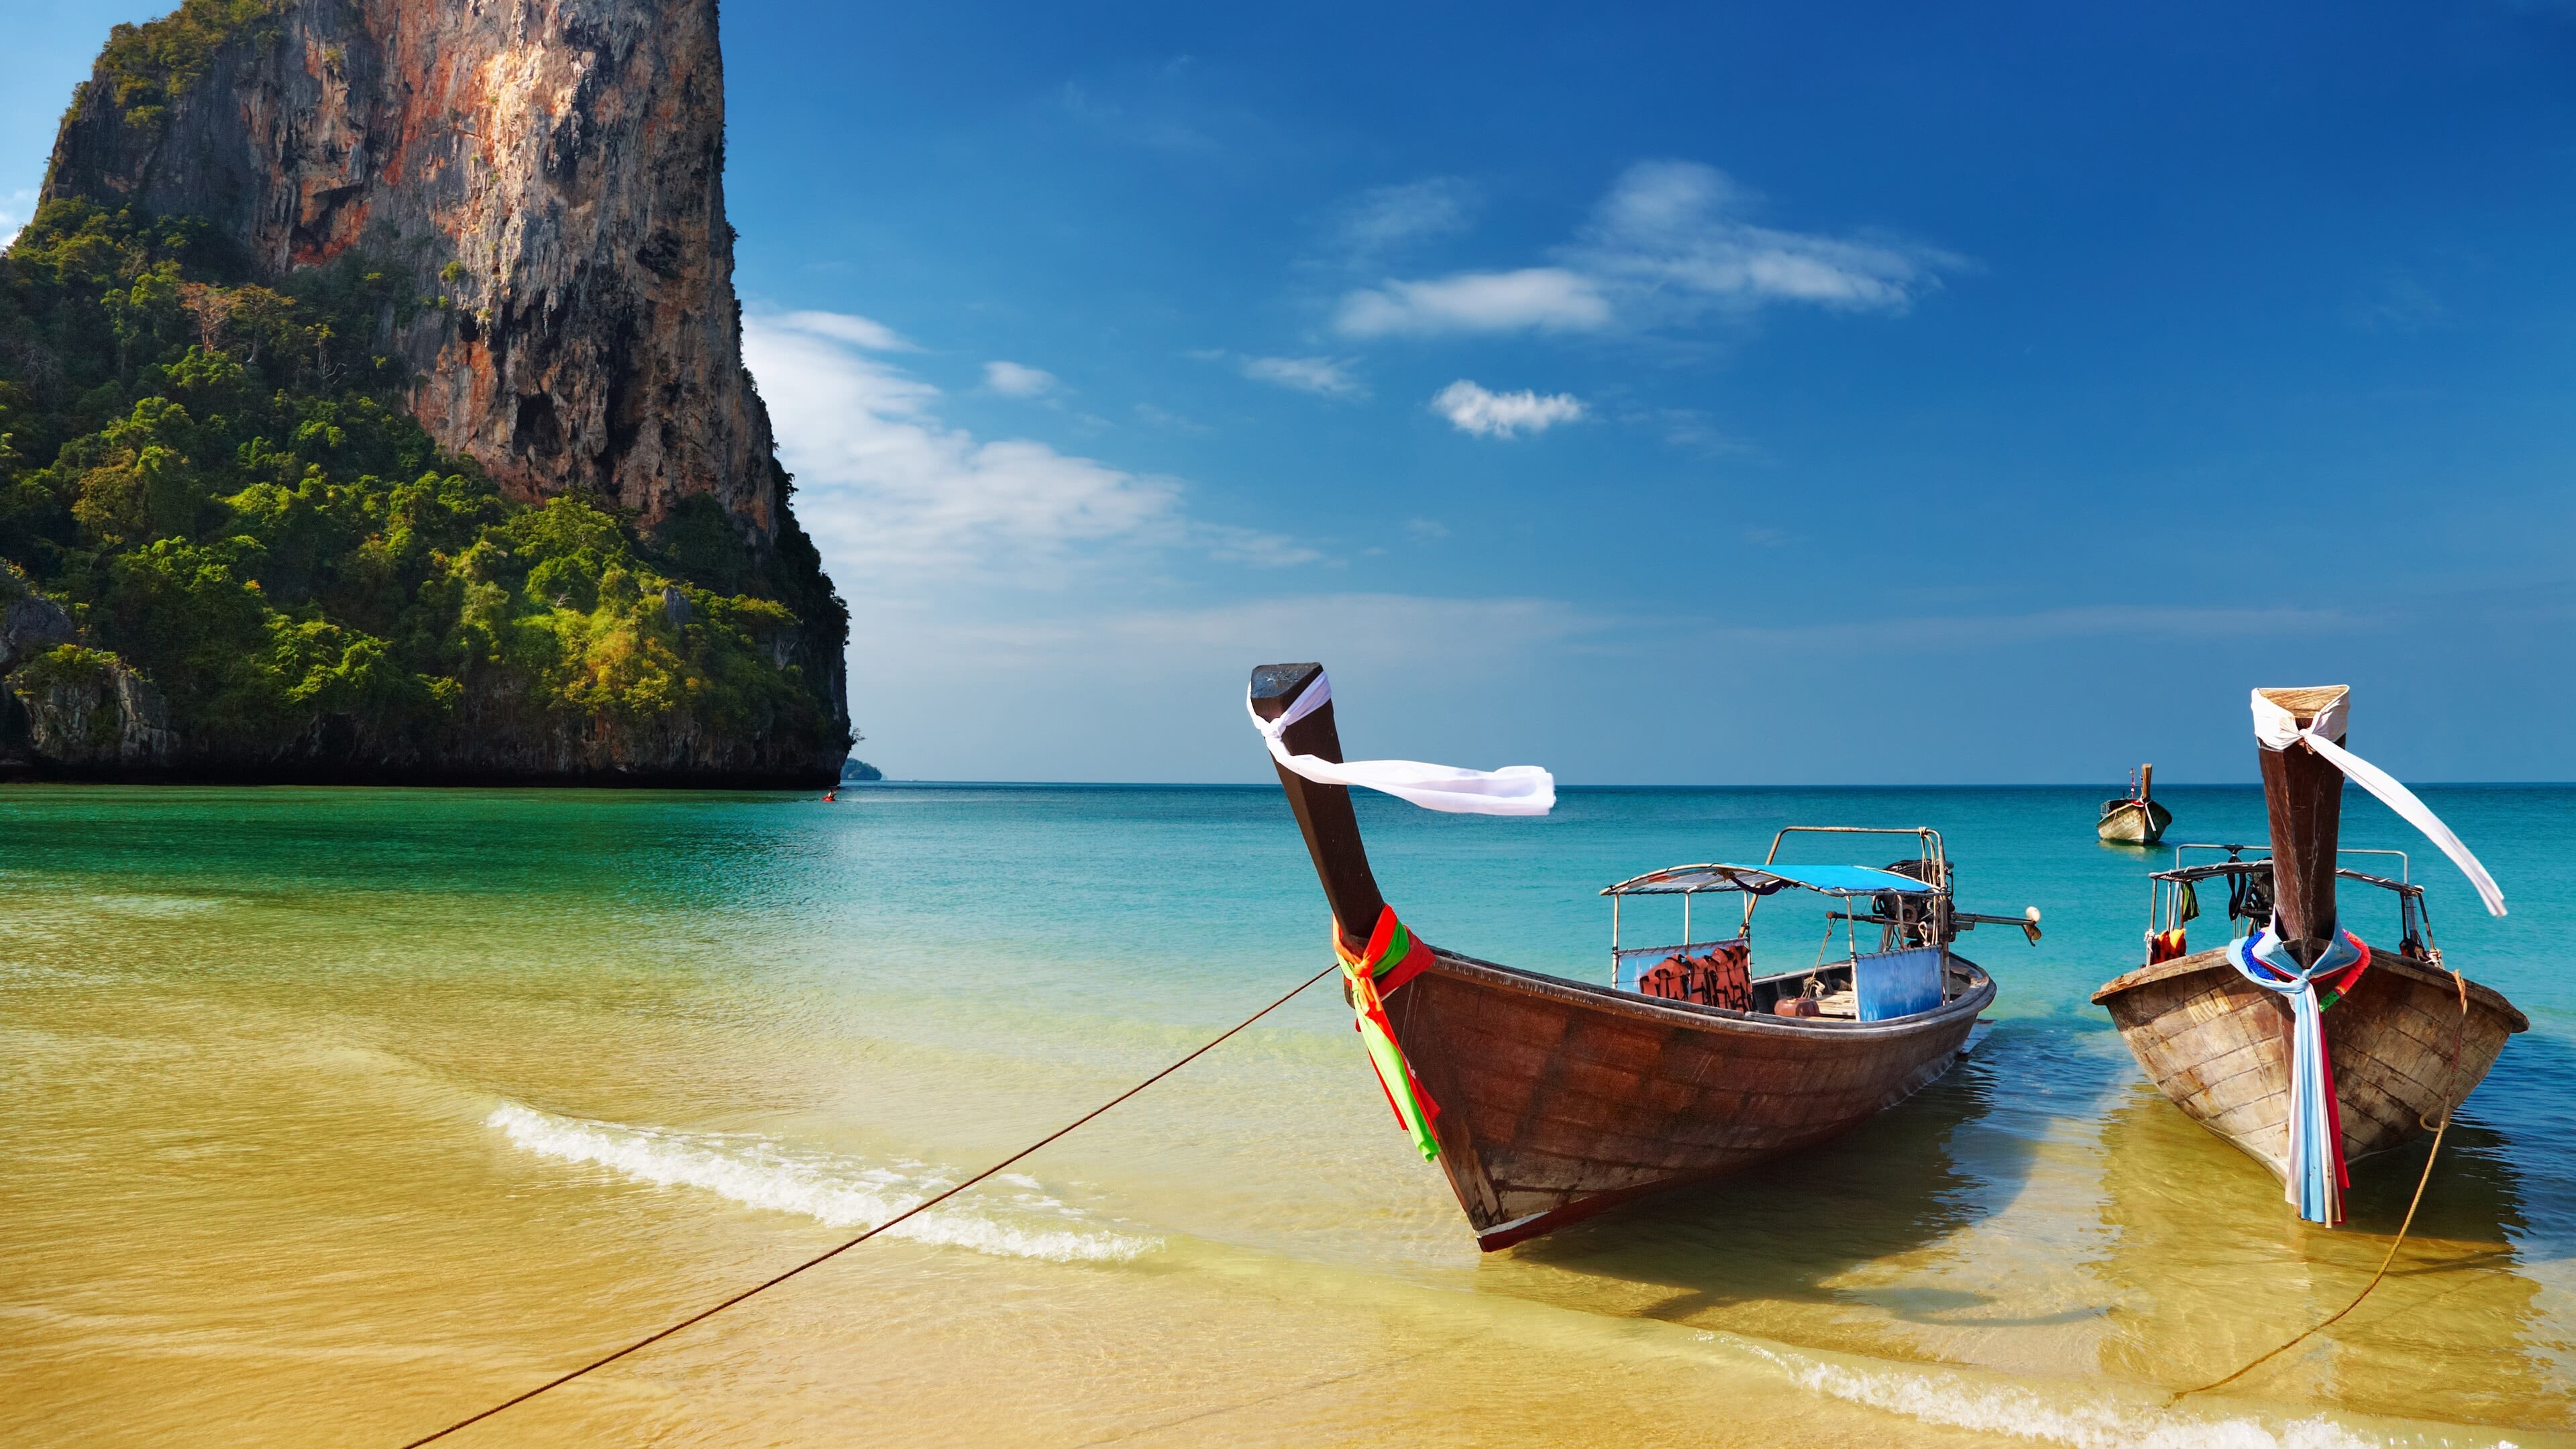 Thailand: Railay Beach, The country historically known as Siam. 3840x2160 4K Background.